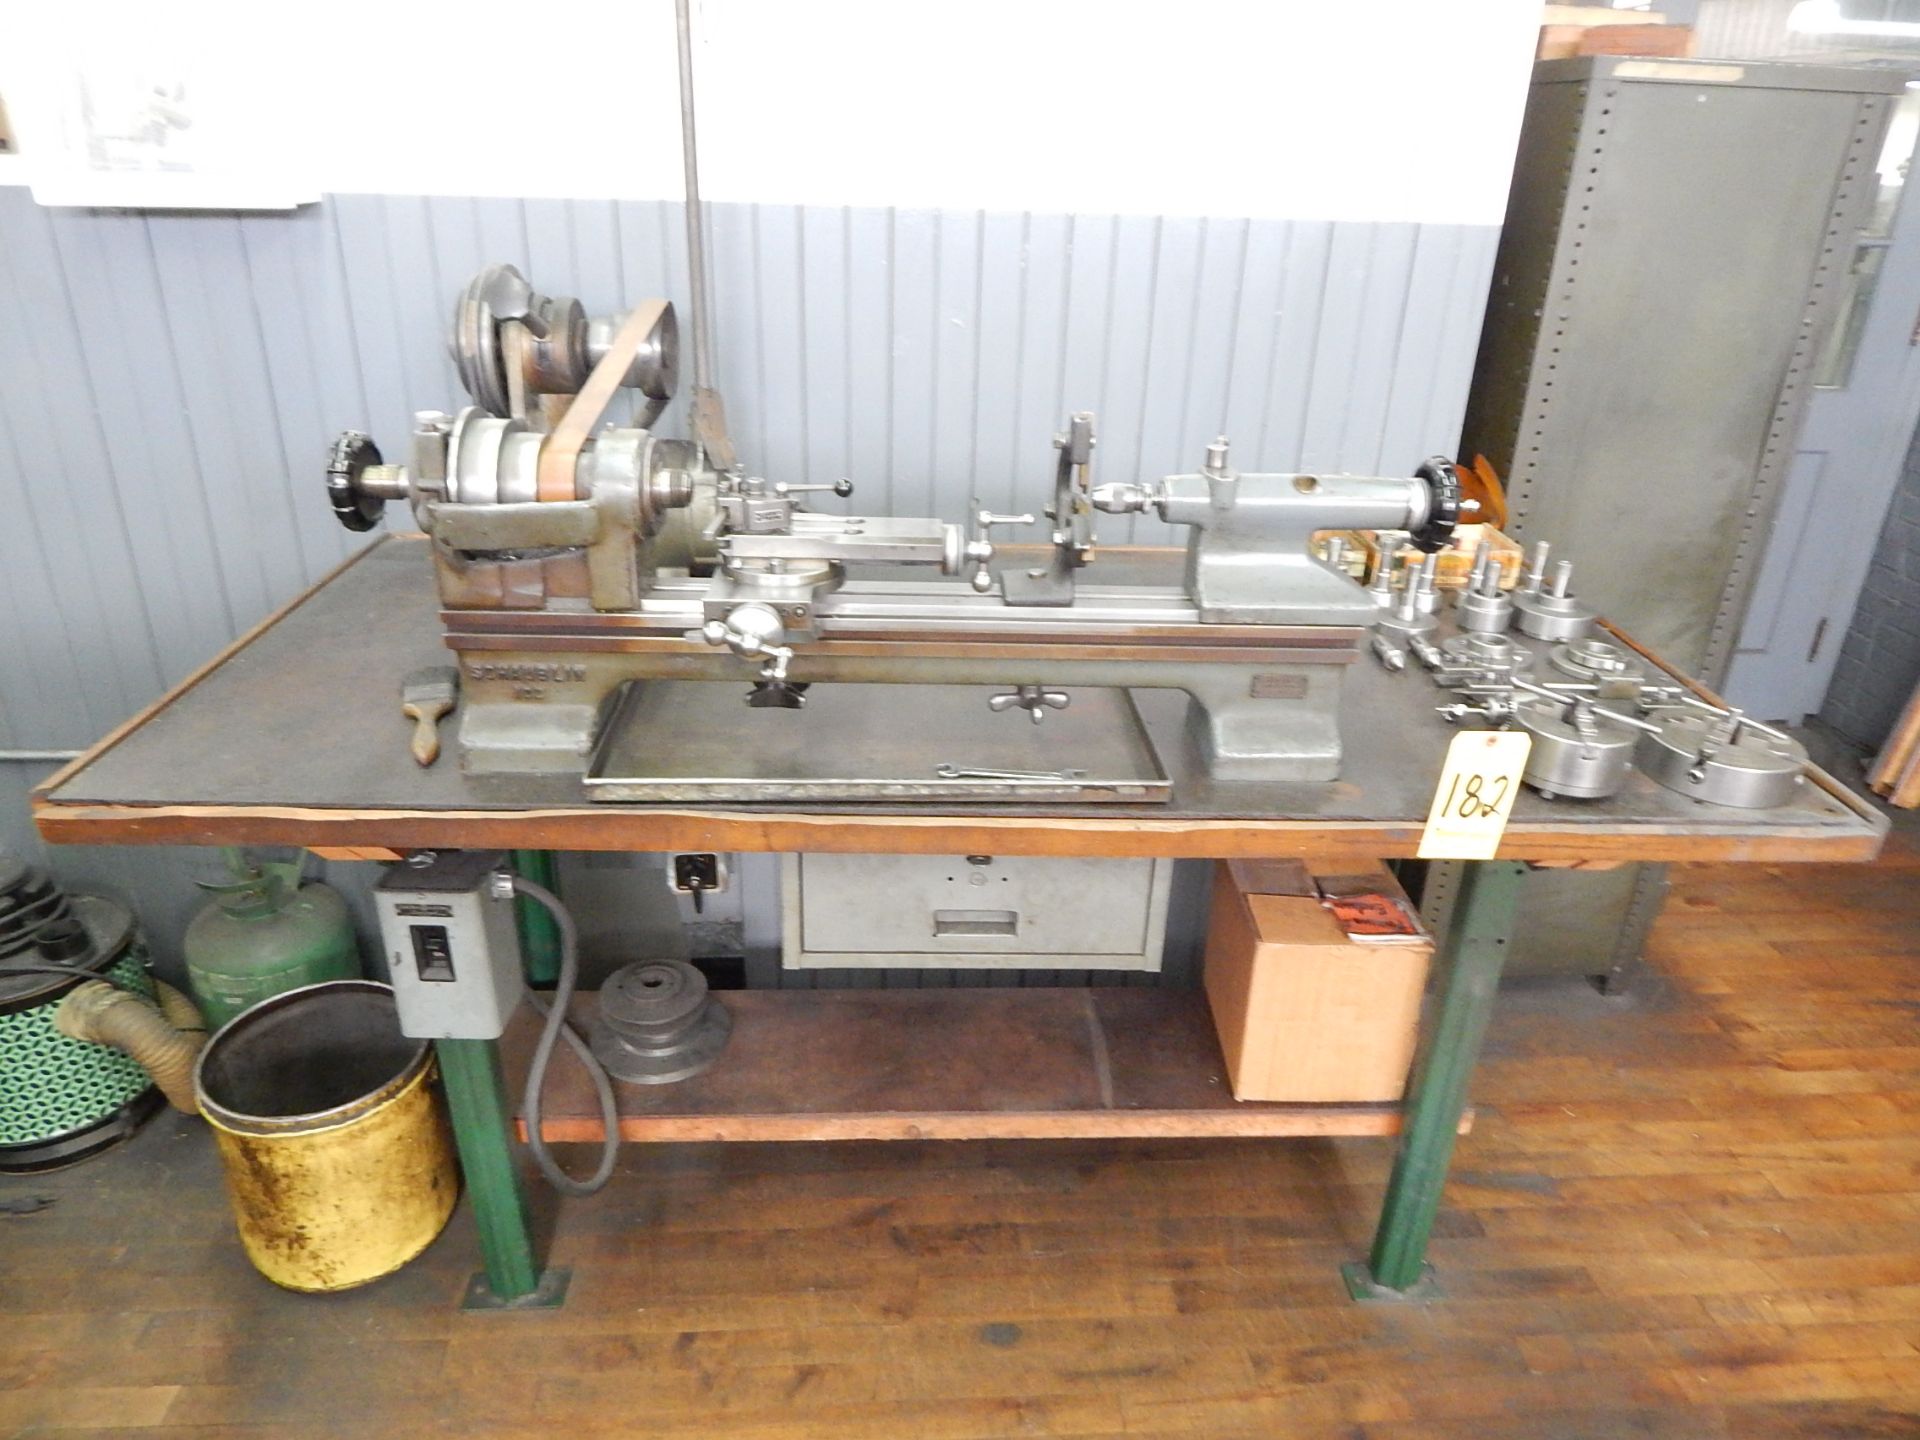 Schaublin Model 102-TO Jewelers Lathe, s/n 157889, with Accessories and Work Bench